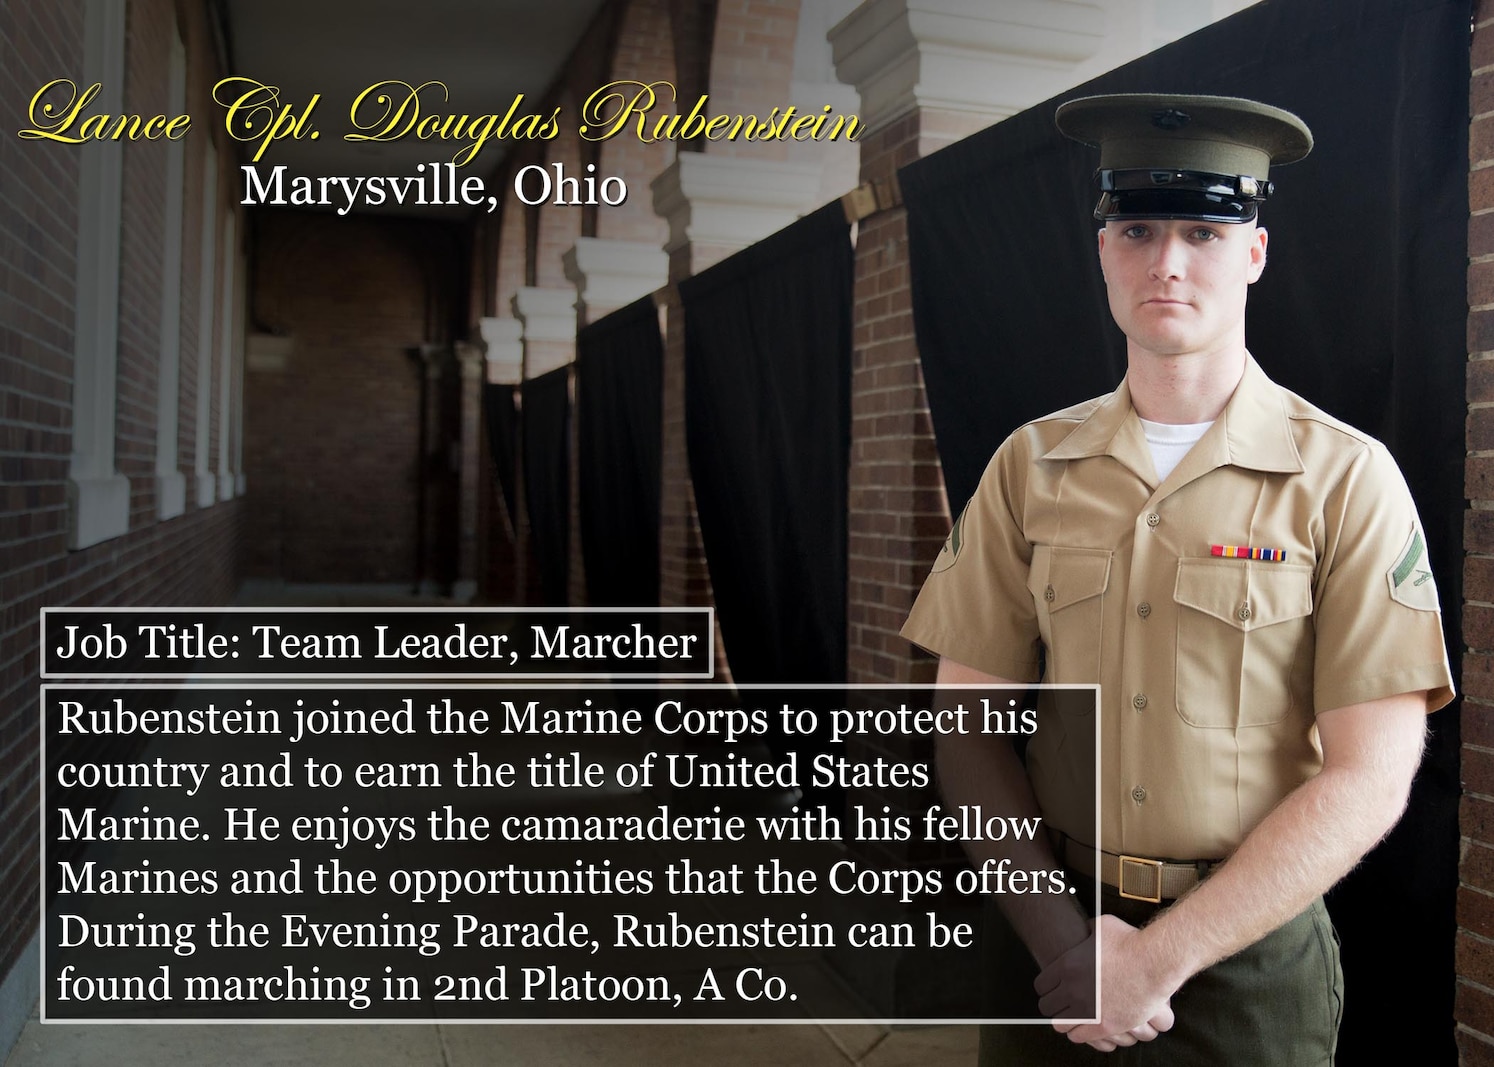 Marysville, Ohio
Job Title: Team Leader, Marcher
Rubenstein joined the Marine Corps to protect his country and to earn the title of United States Marine. He enjoys the camaraderie with his fellow Marines and the opportunities that the Corps offers. During the Evening Parade, Rubenstein can be found marching in 2nd Platoon, A Co.
(Official Marine Corps graphic by Cpl. Chi Nguyen/Released)